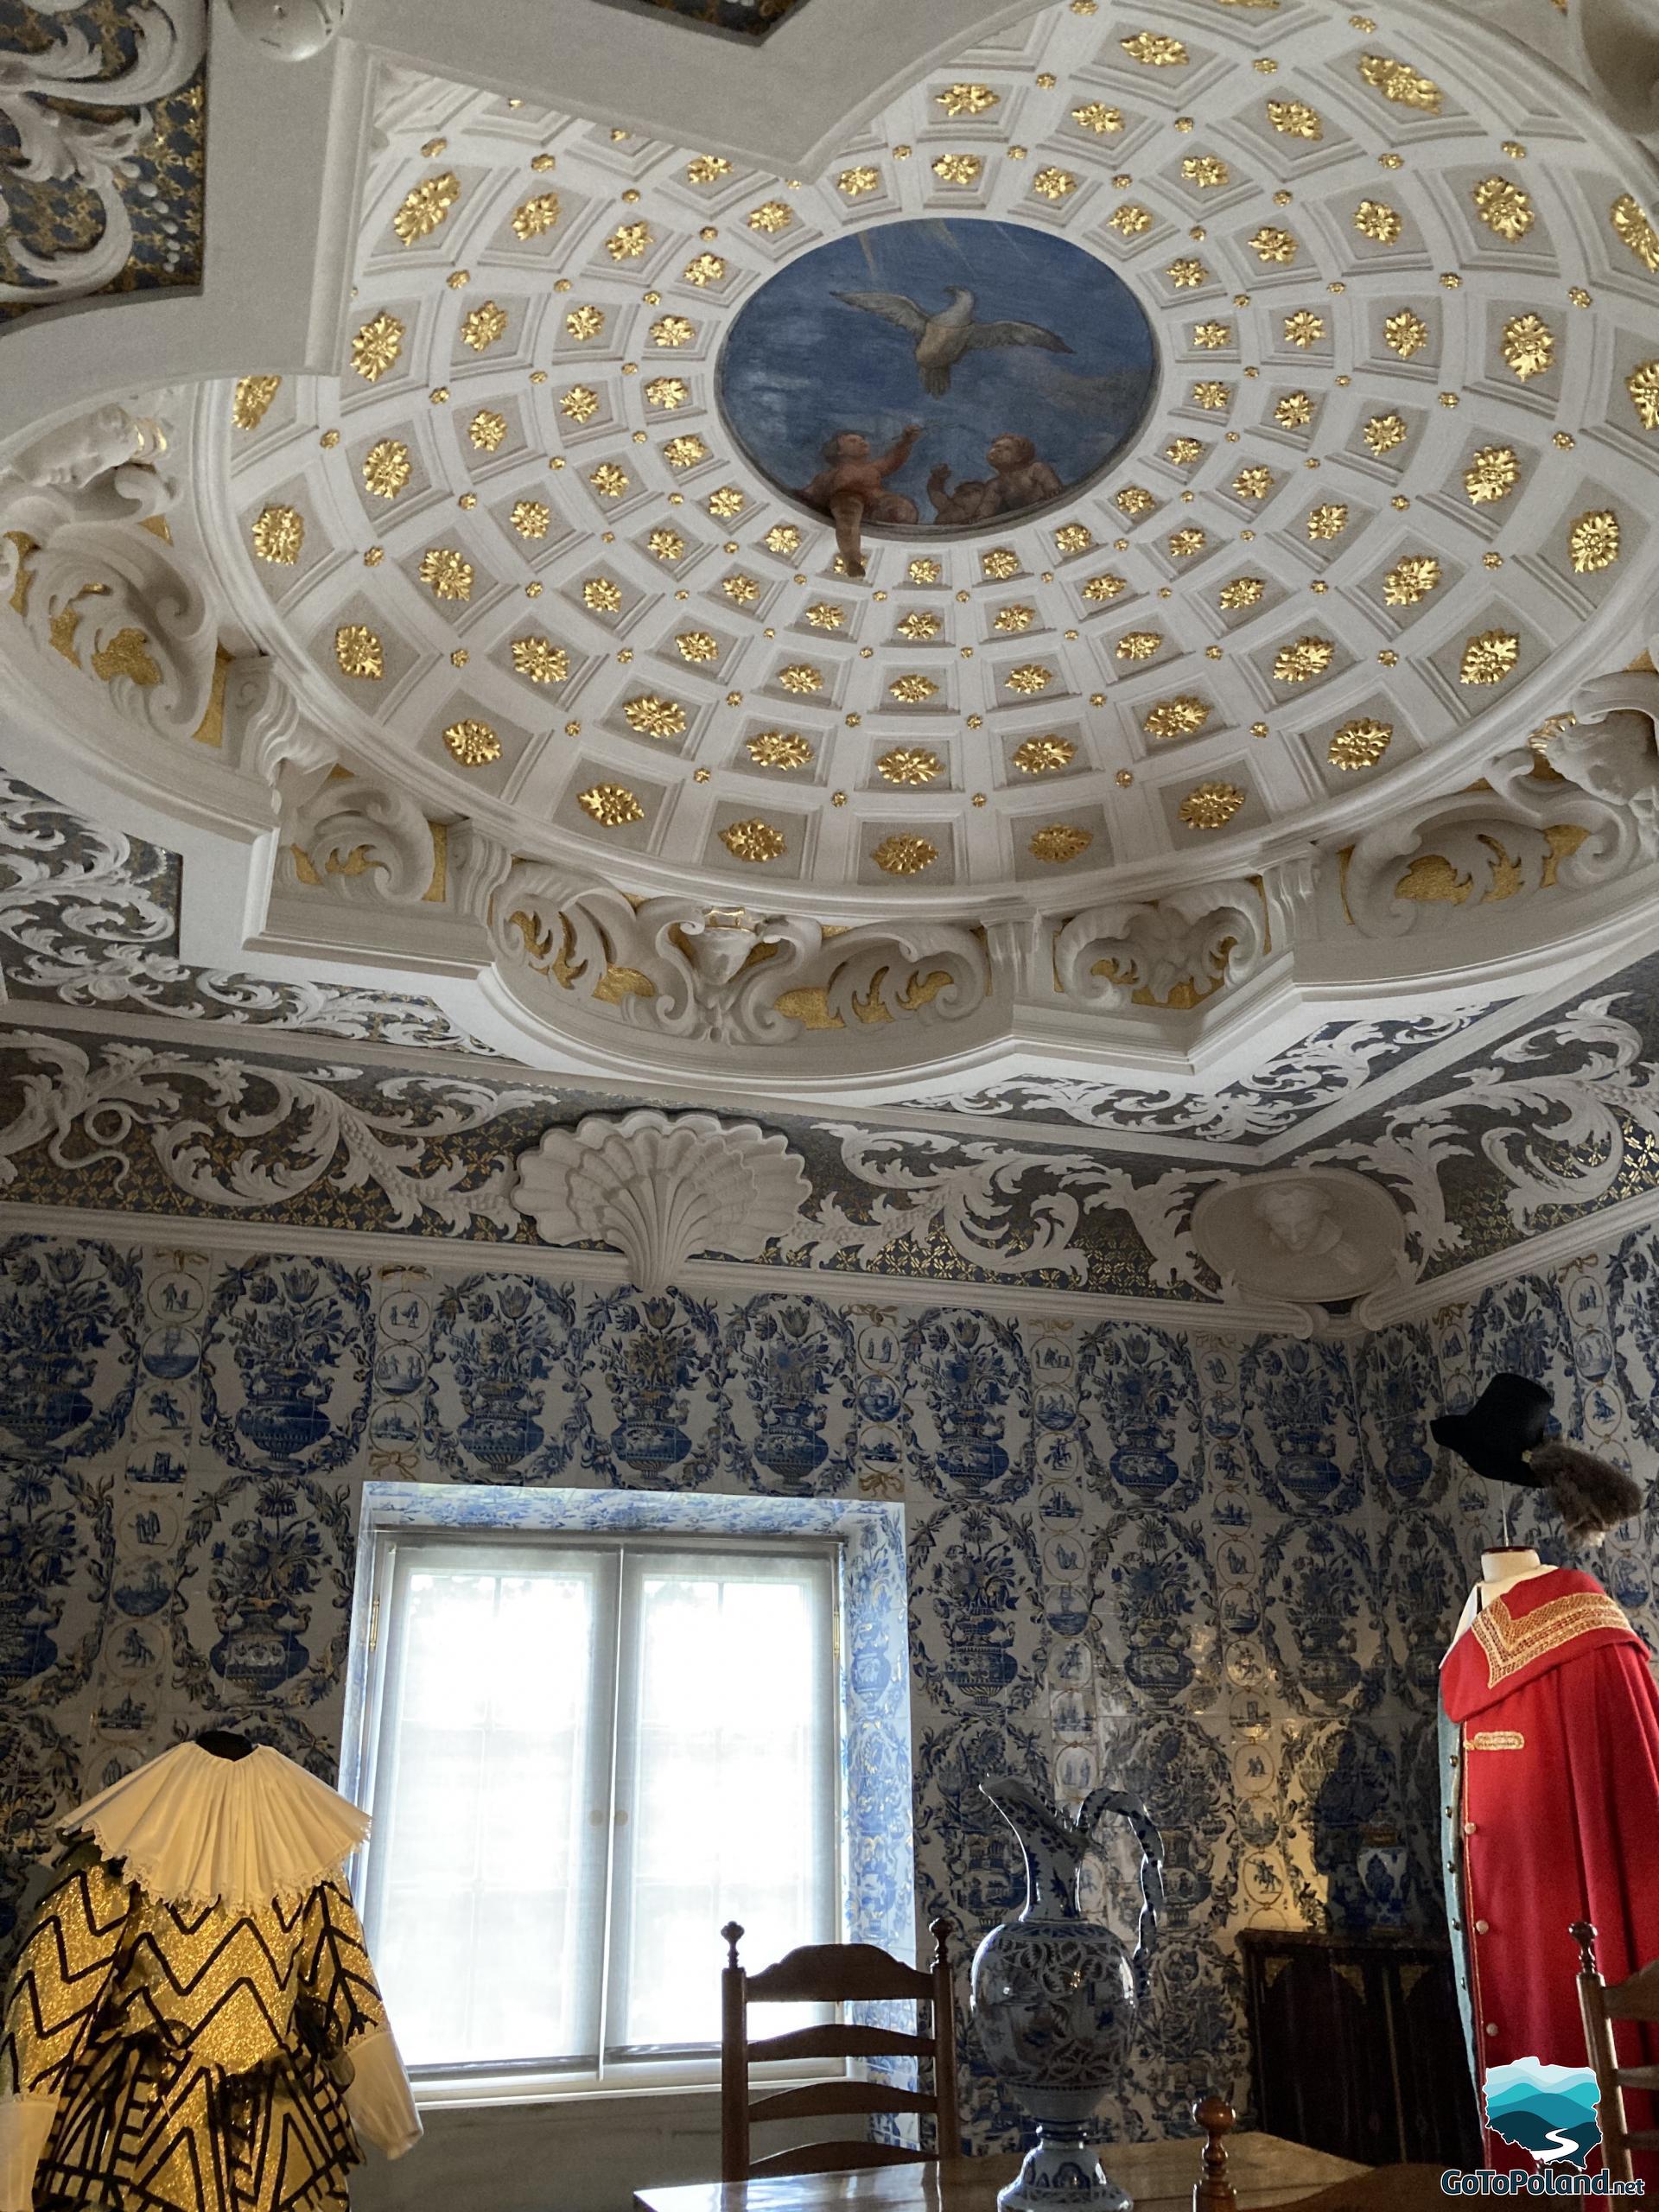 a domed ceiling with a painting of a cupid, the walls of the room decorated with blue decorations, two vintage clothes